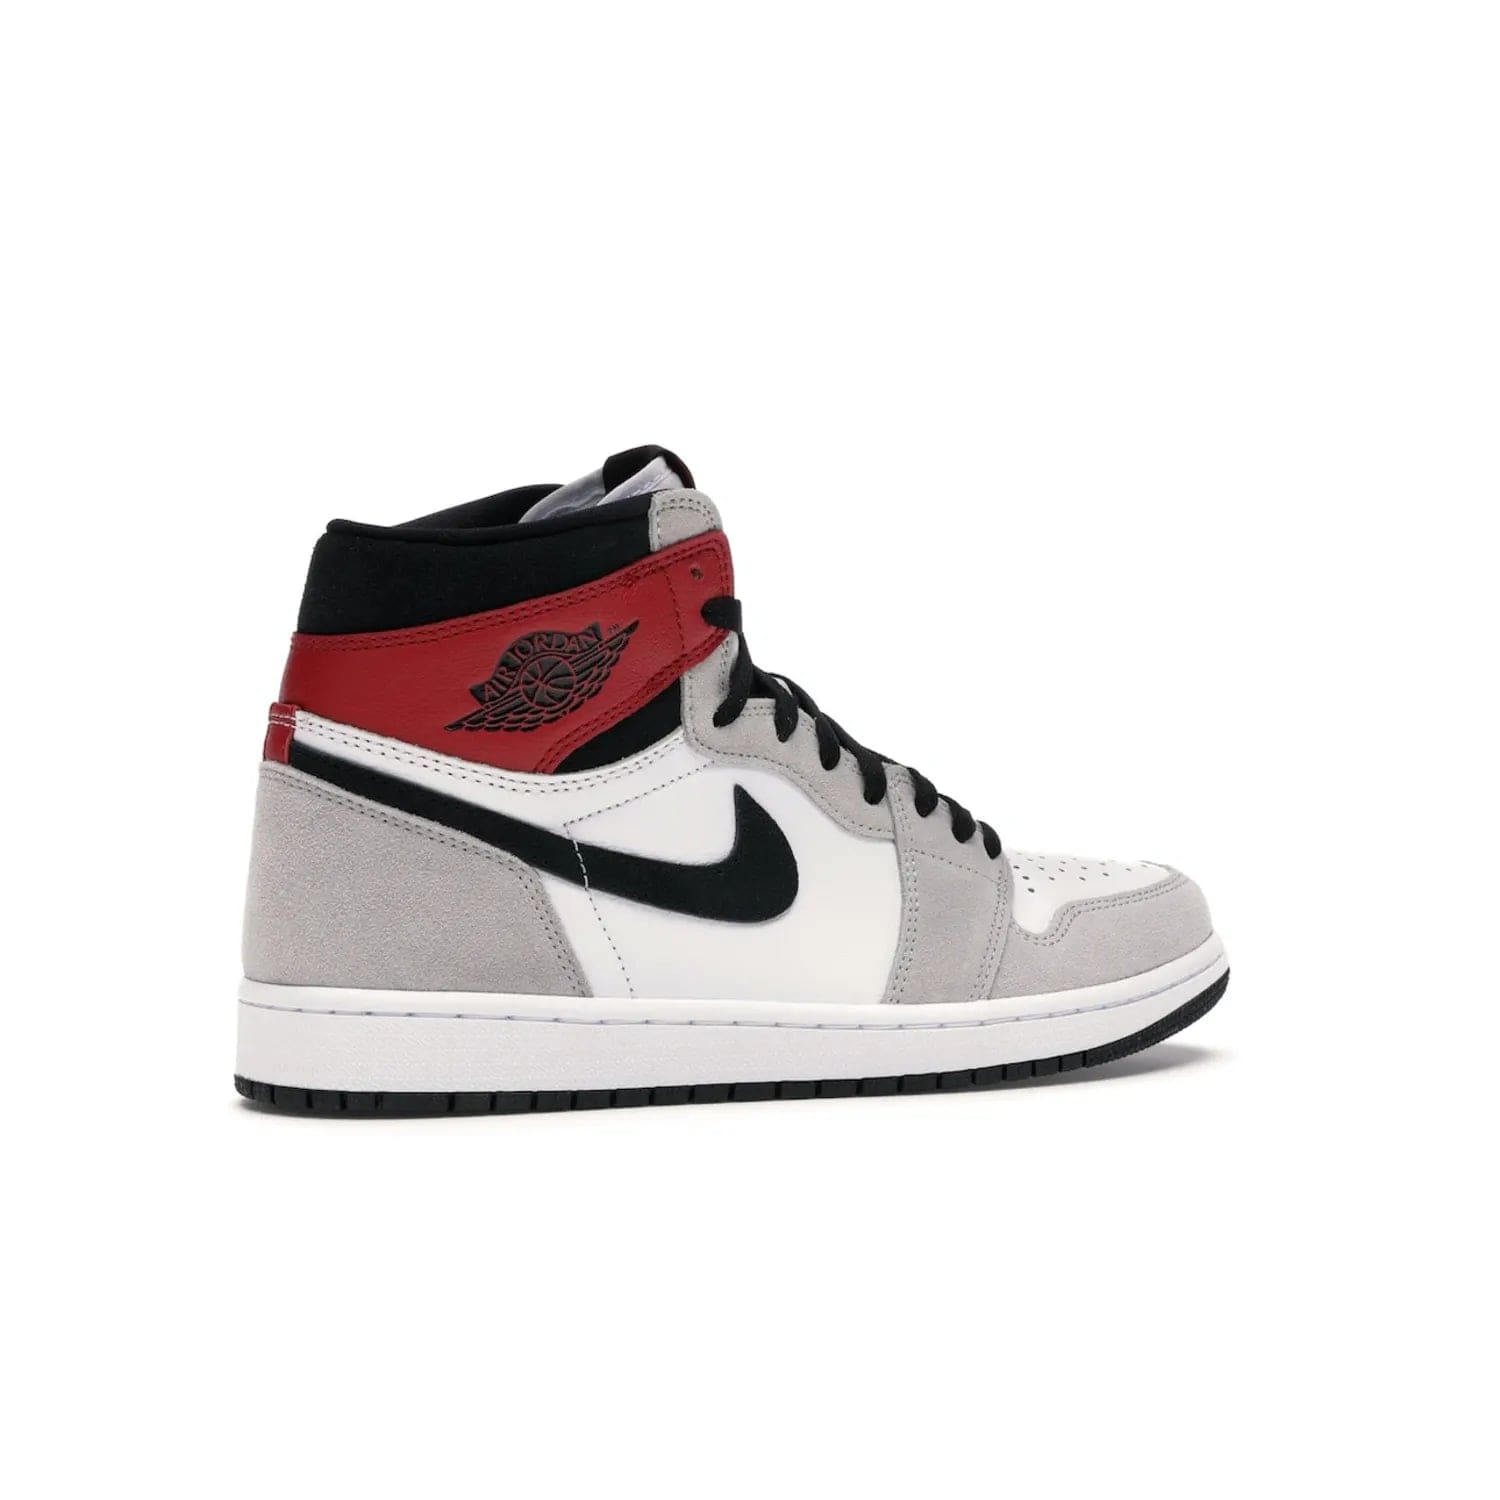 Jordan 1 Retro High Light Smoke Grey - Image 34 - Only at www.BallersClubKickz.com - Comfortable and stylish, Jordan 1 Retro High Light Smoke Grey offers a unique spin on a classic design. White leather, grey suede, red leather and black details are set on a white midsole and black outsole. Get the sneaker released in July 2020 and add a twist to your wardrobe.